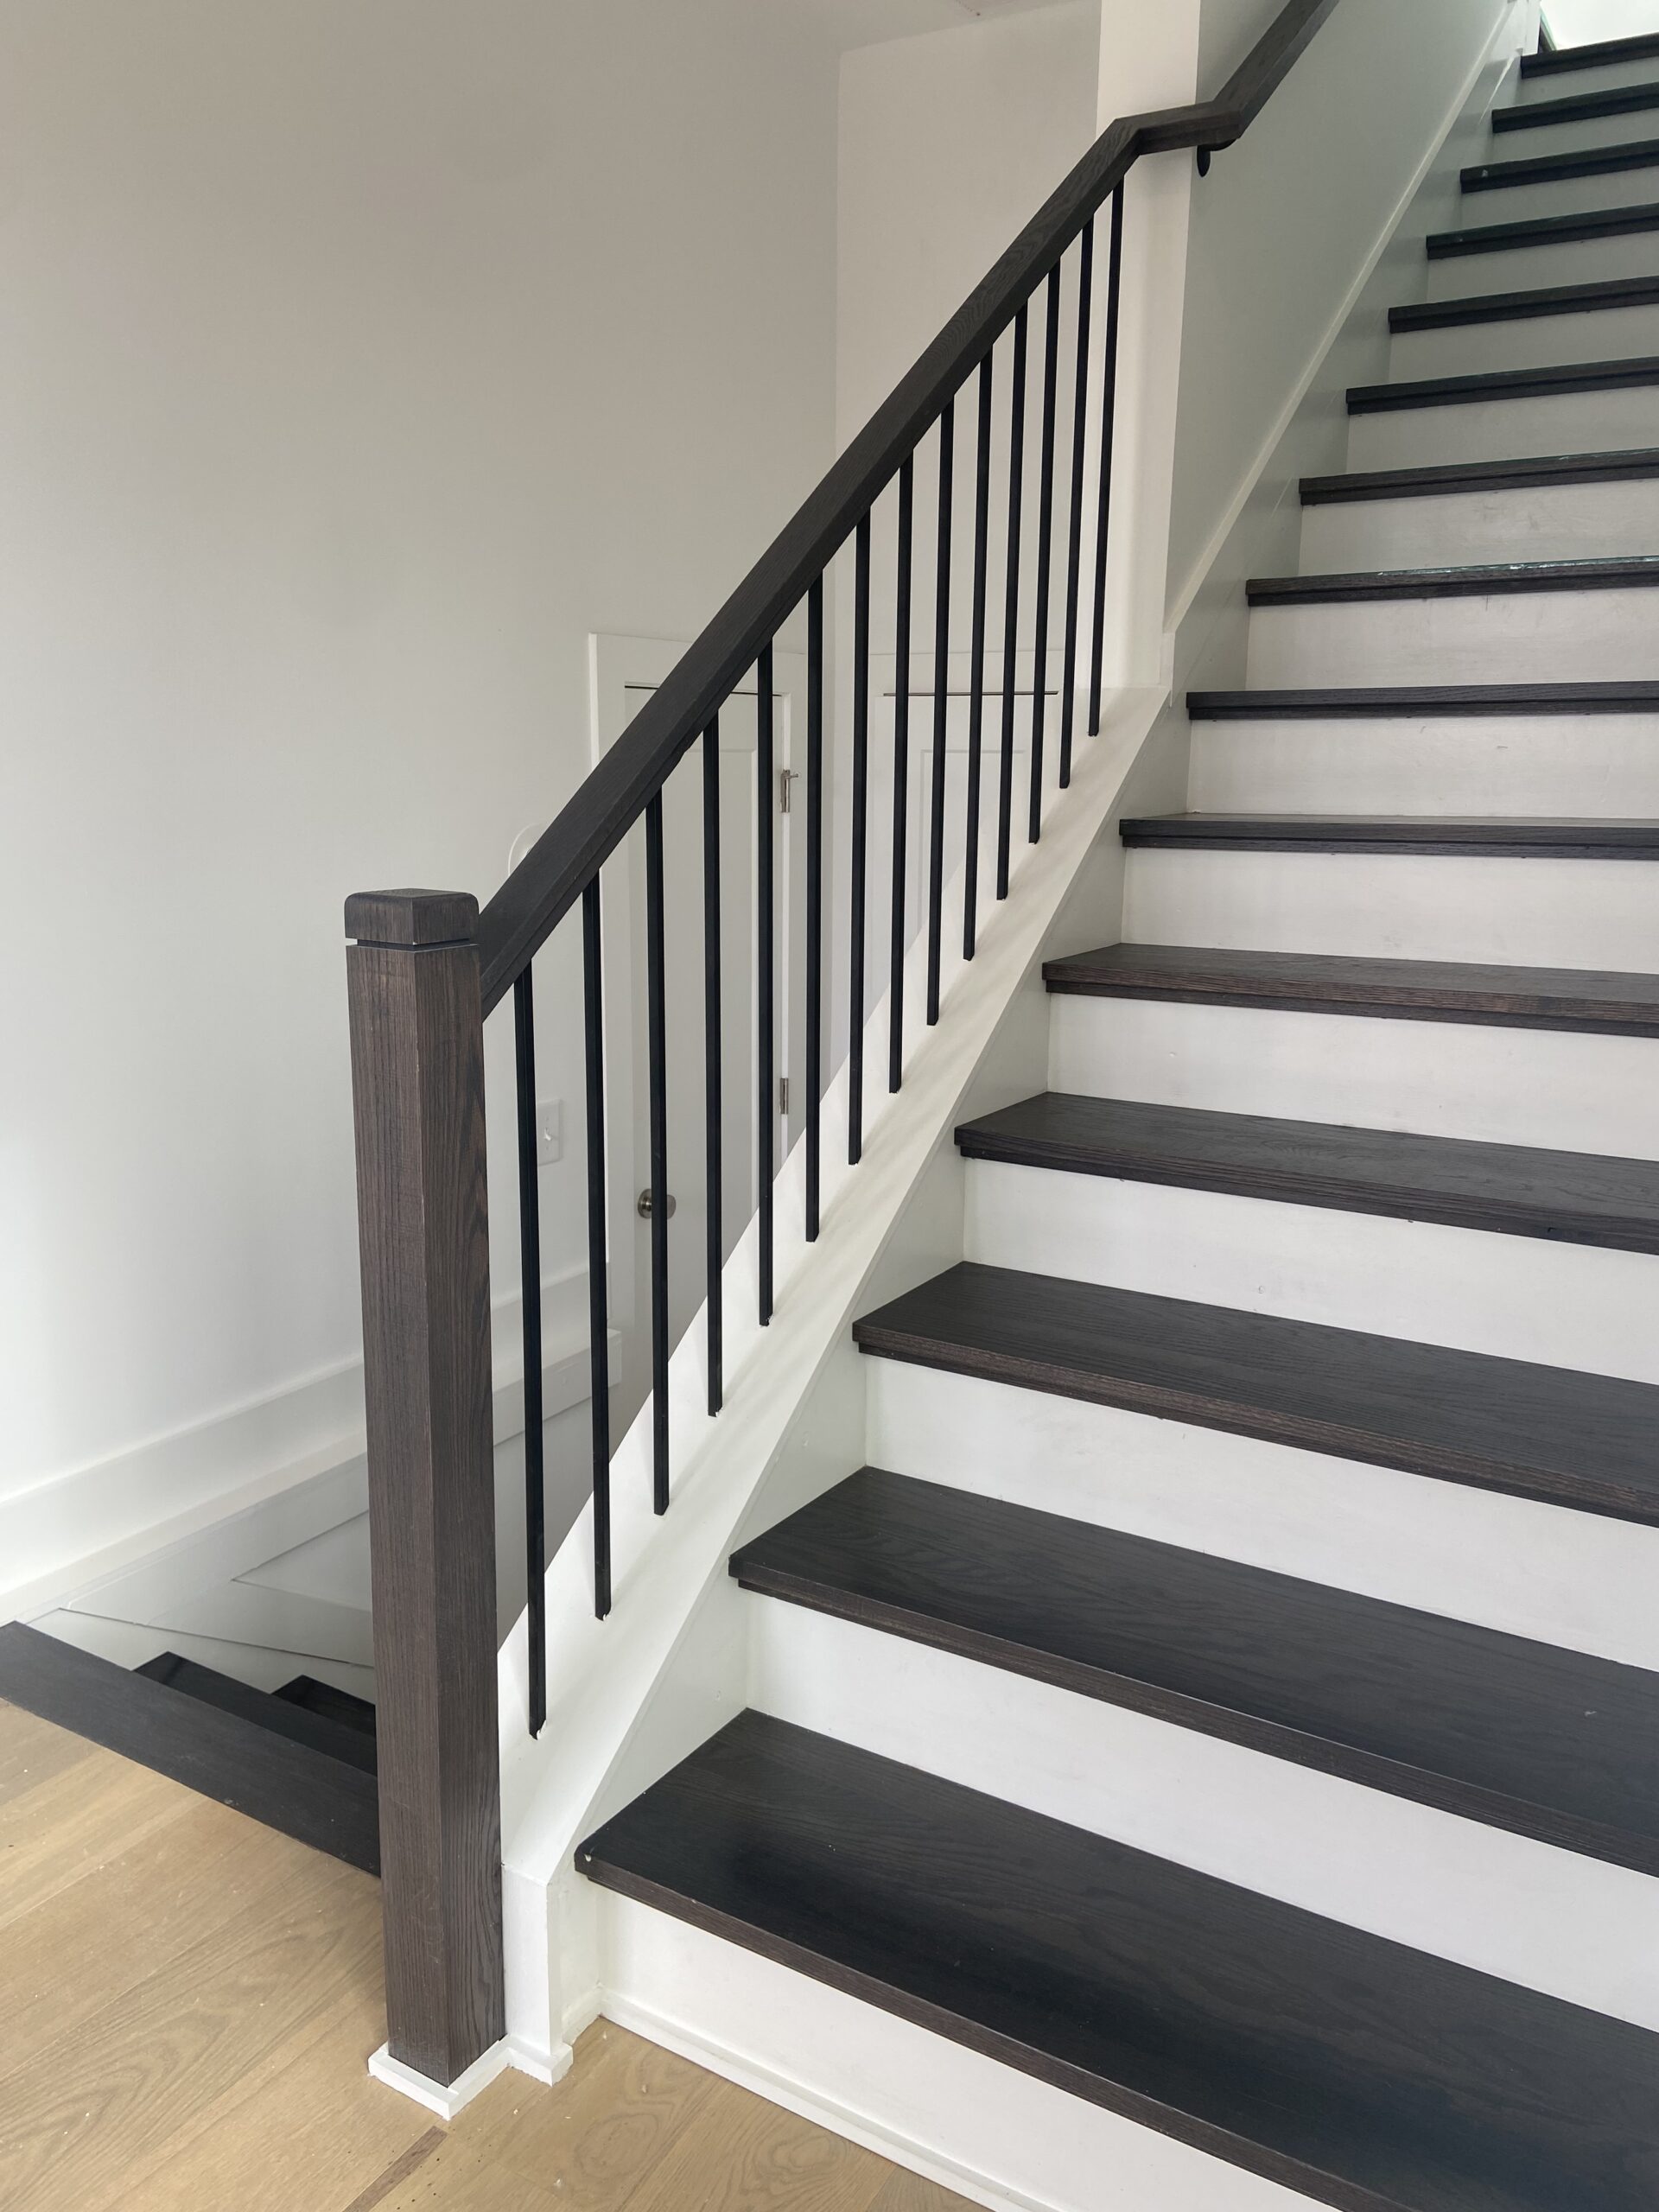 wood and iron stair railing on traditional straight stairs